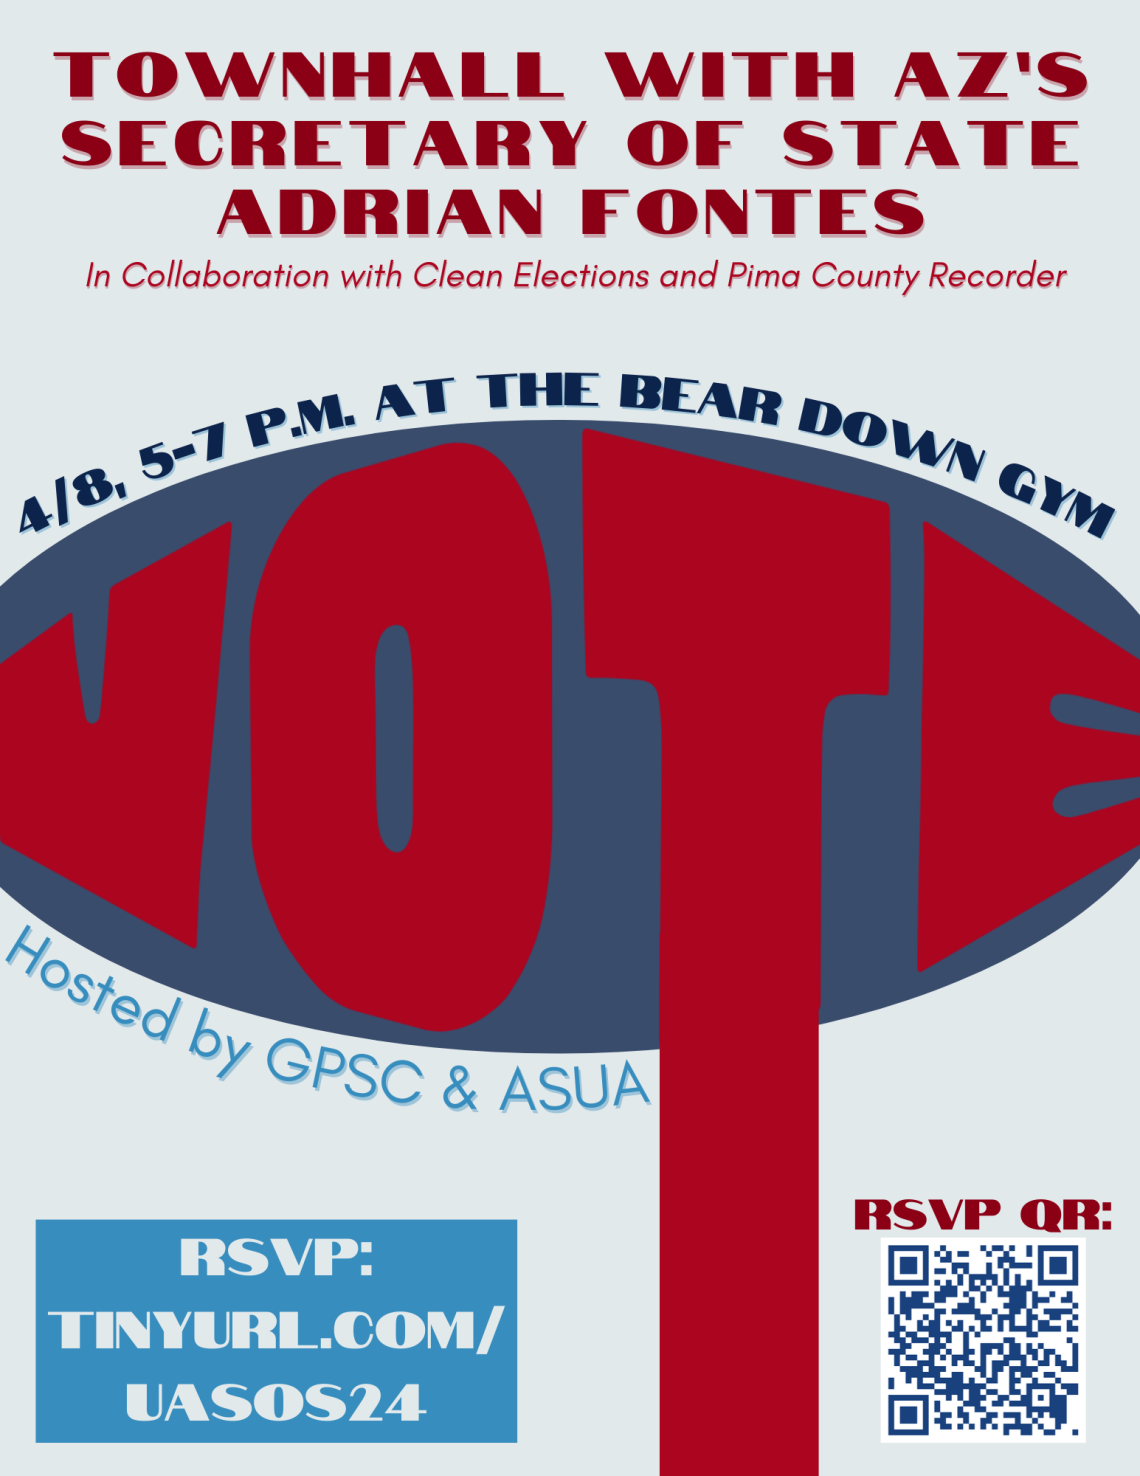 Townhall with AZ's Secretary of State Adrian Fontes